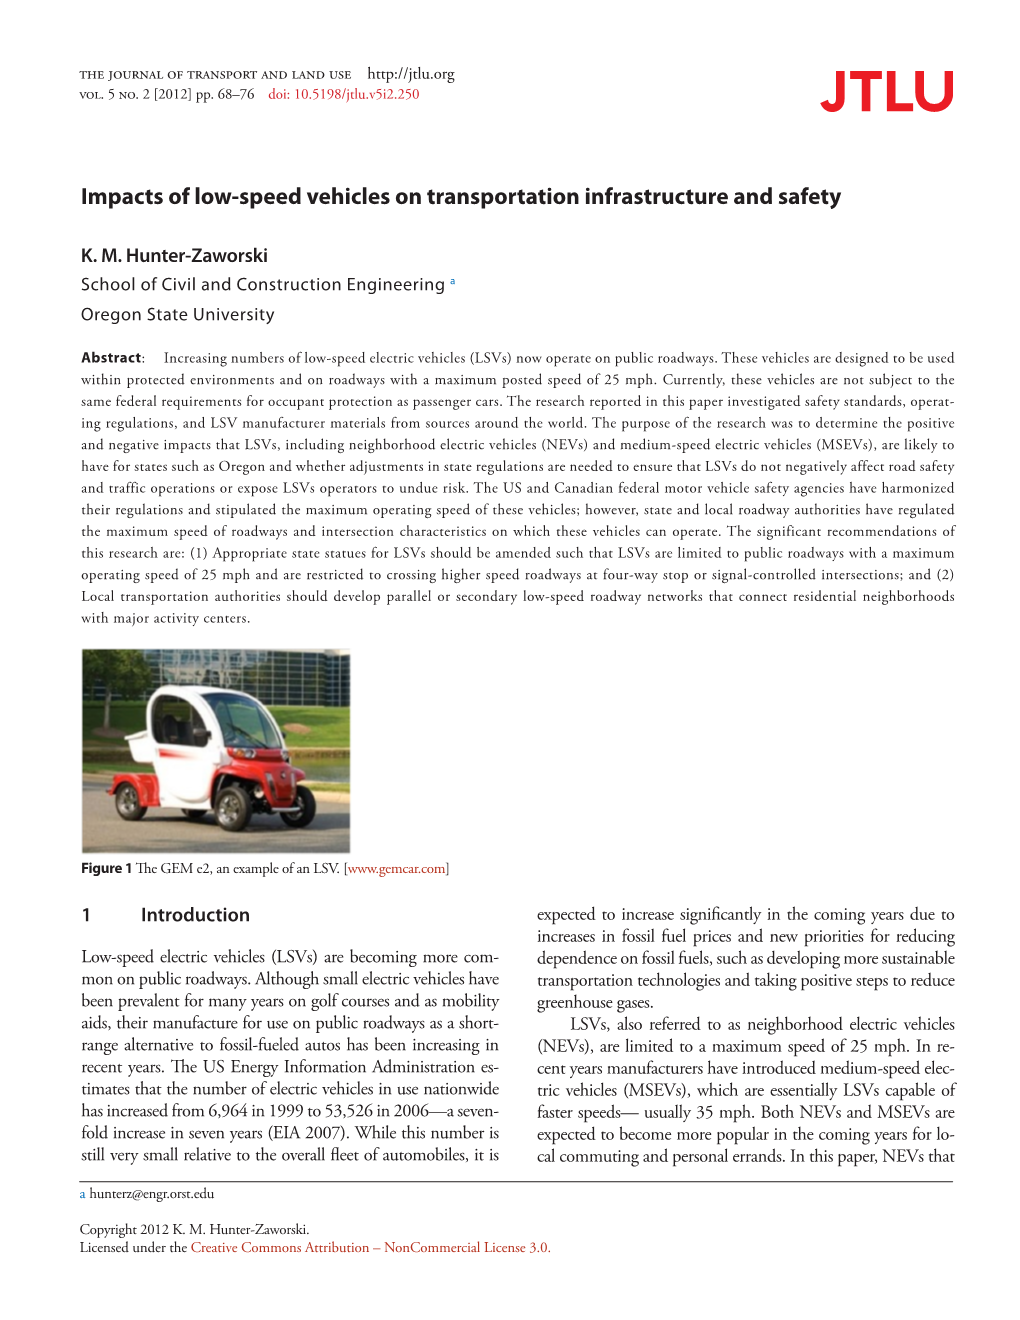 Impacts of Low-Speed Vehicles on Transportation Infrastructure and Safety